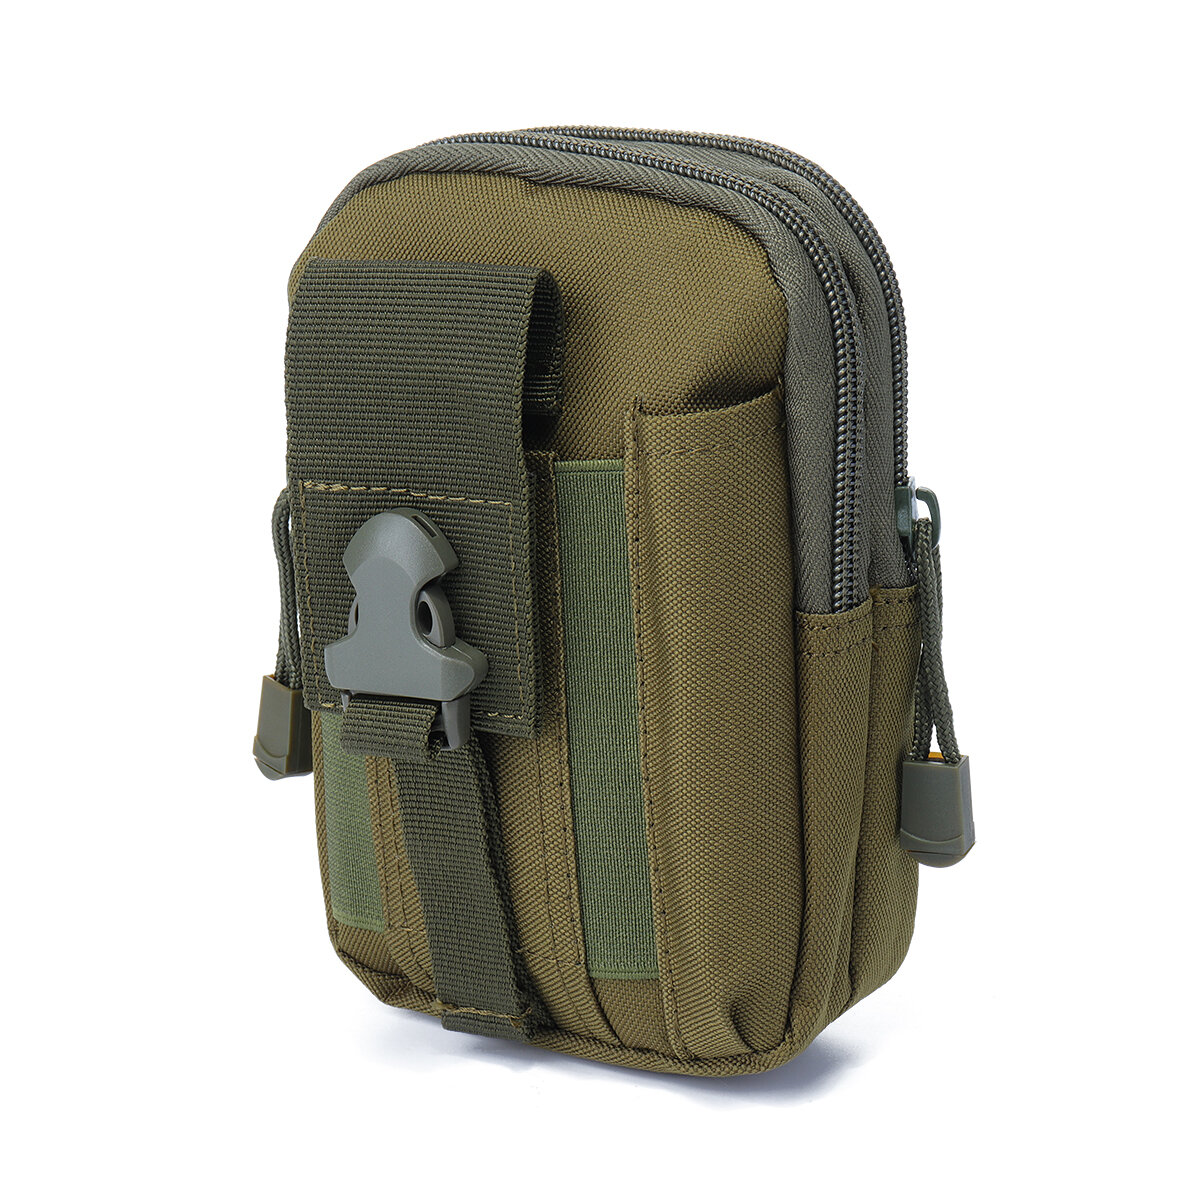 best price,ipree,inch,outdoor,edc,waist,bag,army,green,discount